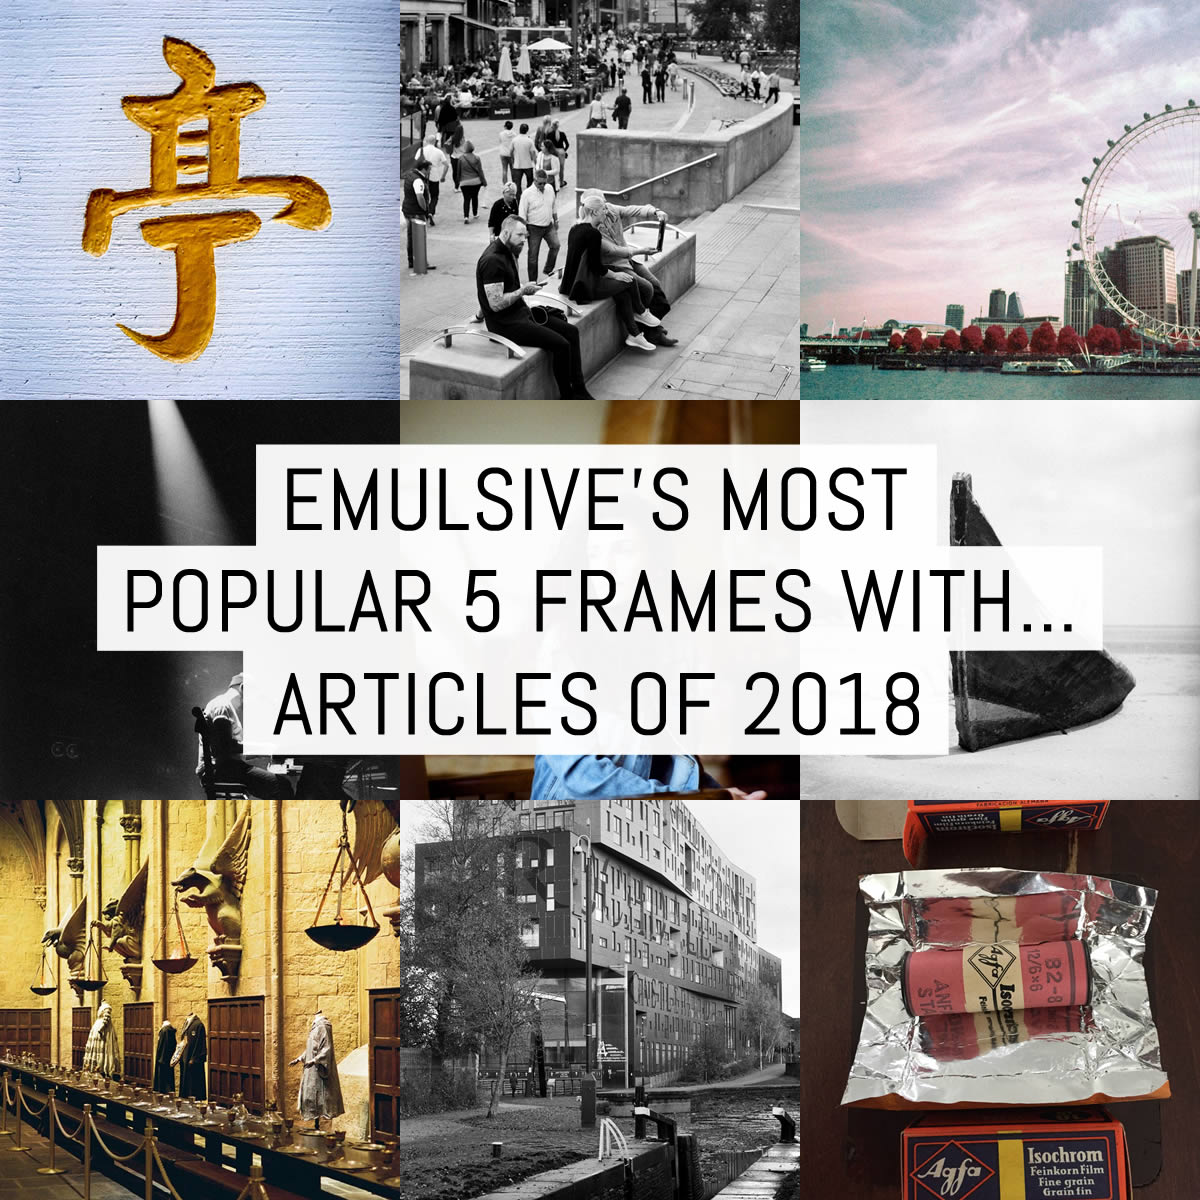 Cover - EMULSIVE's most popular 5 Frames With articles of 2018